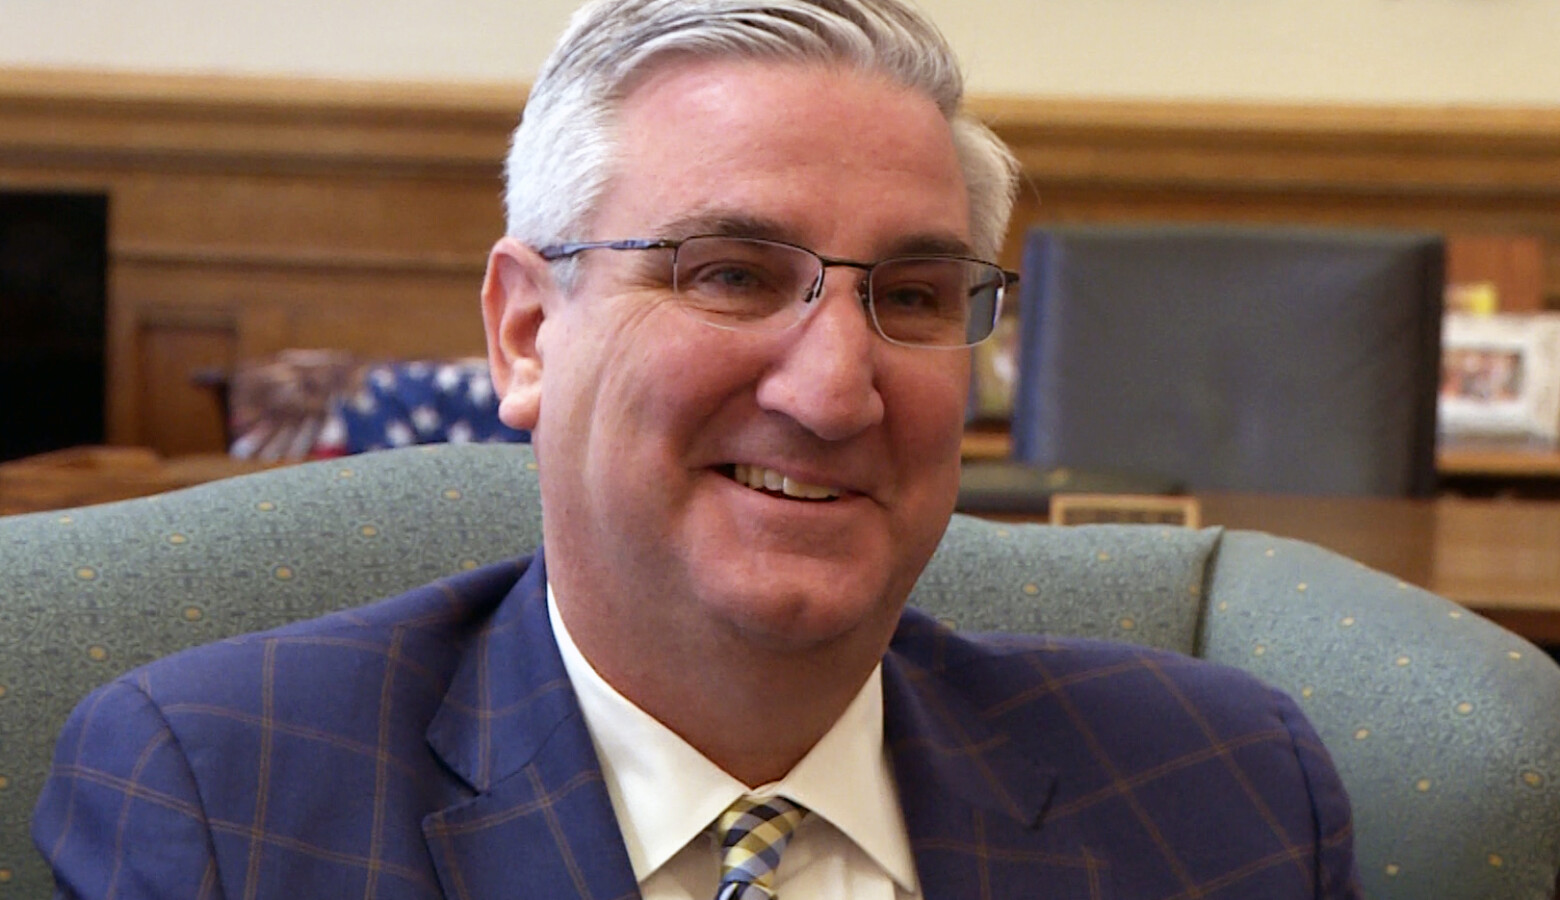 Gov. Eric Holcomb announced Friday he would be extending the state’s “Stay-At-Home” order through May 1, falling in line with neighboring states. (Zach Herndon/WTIU)